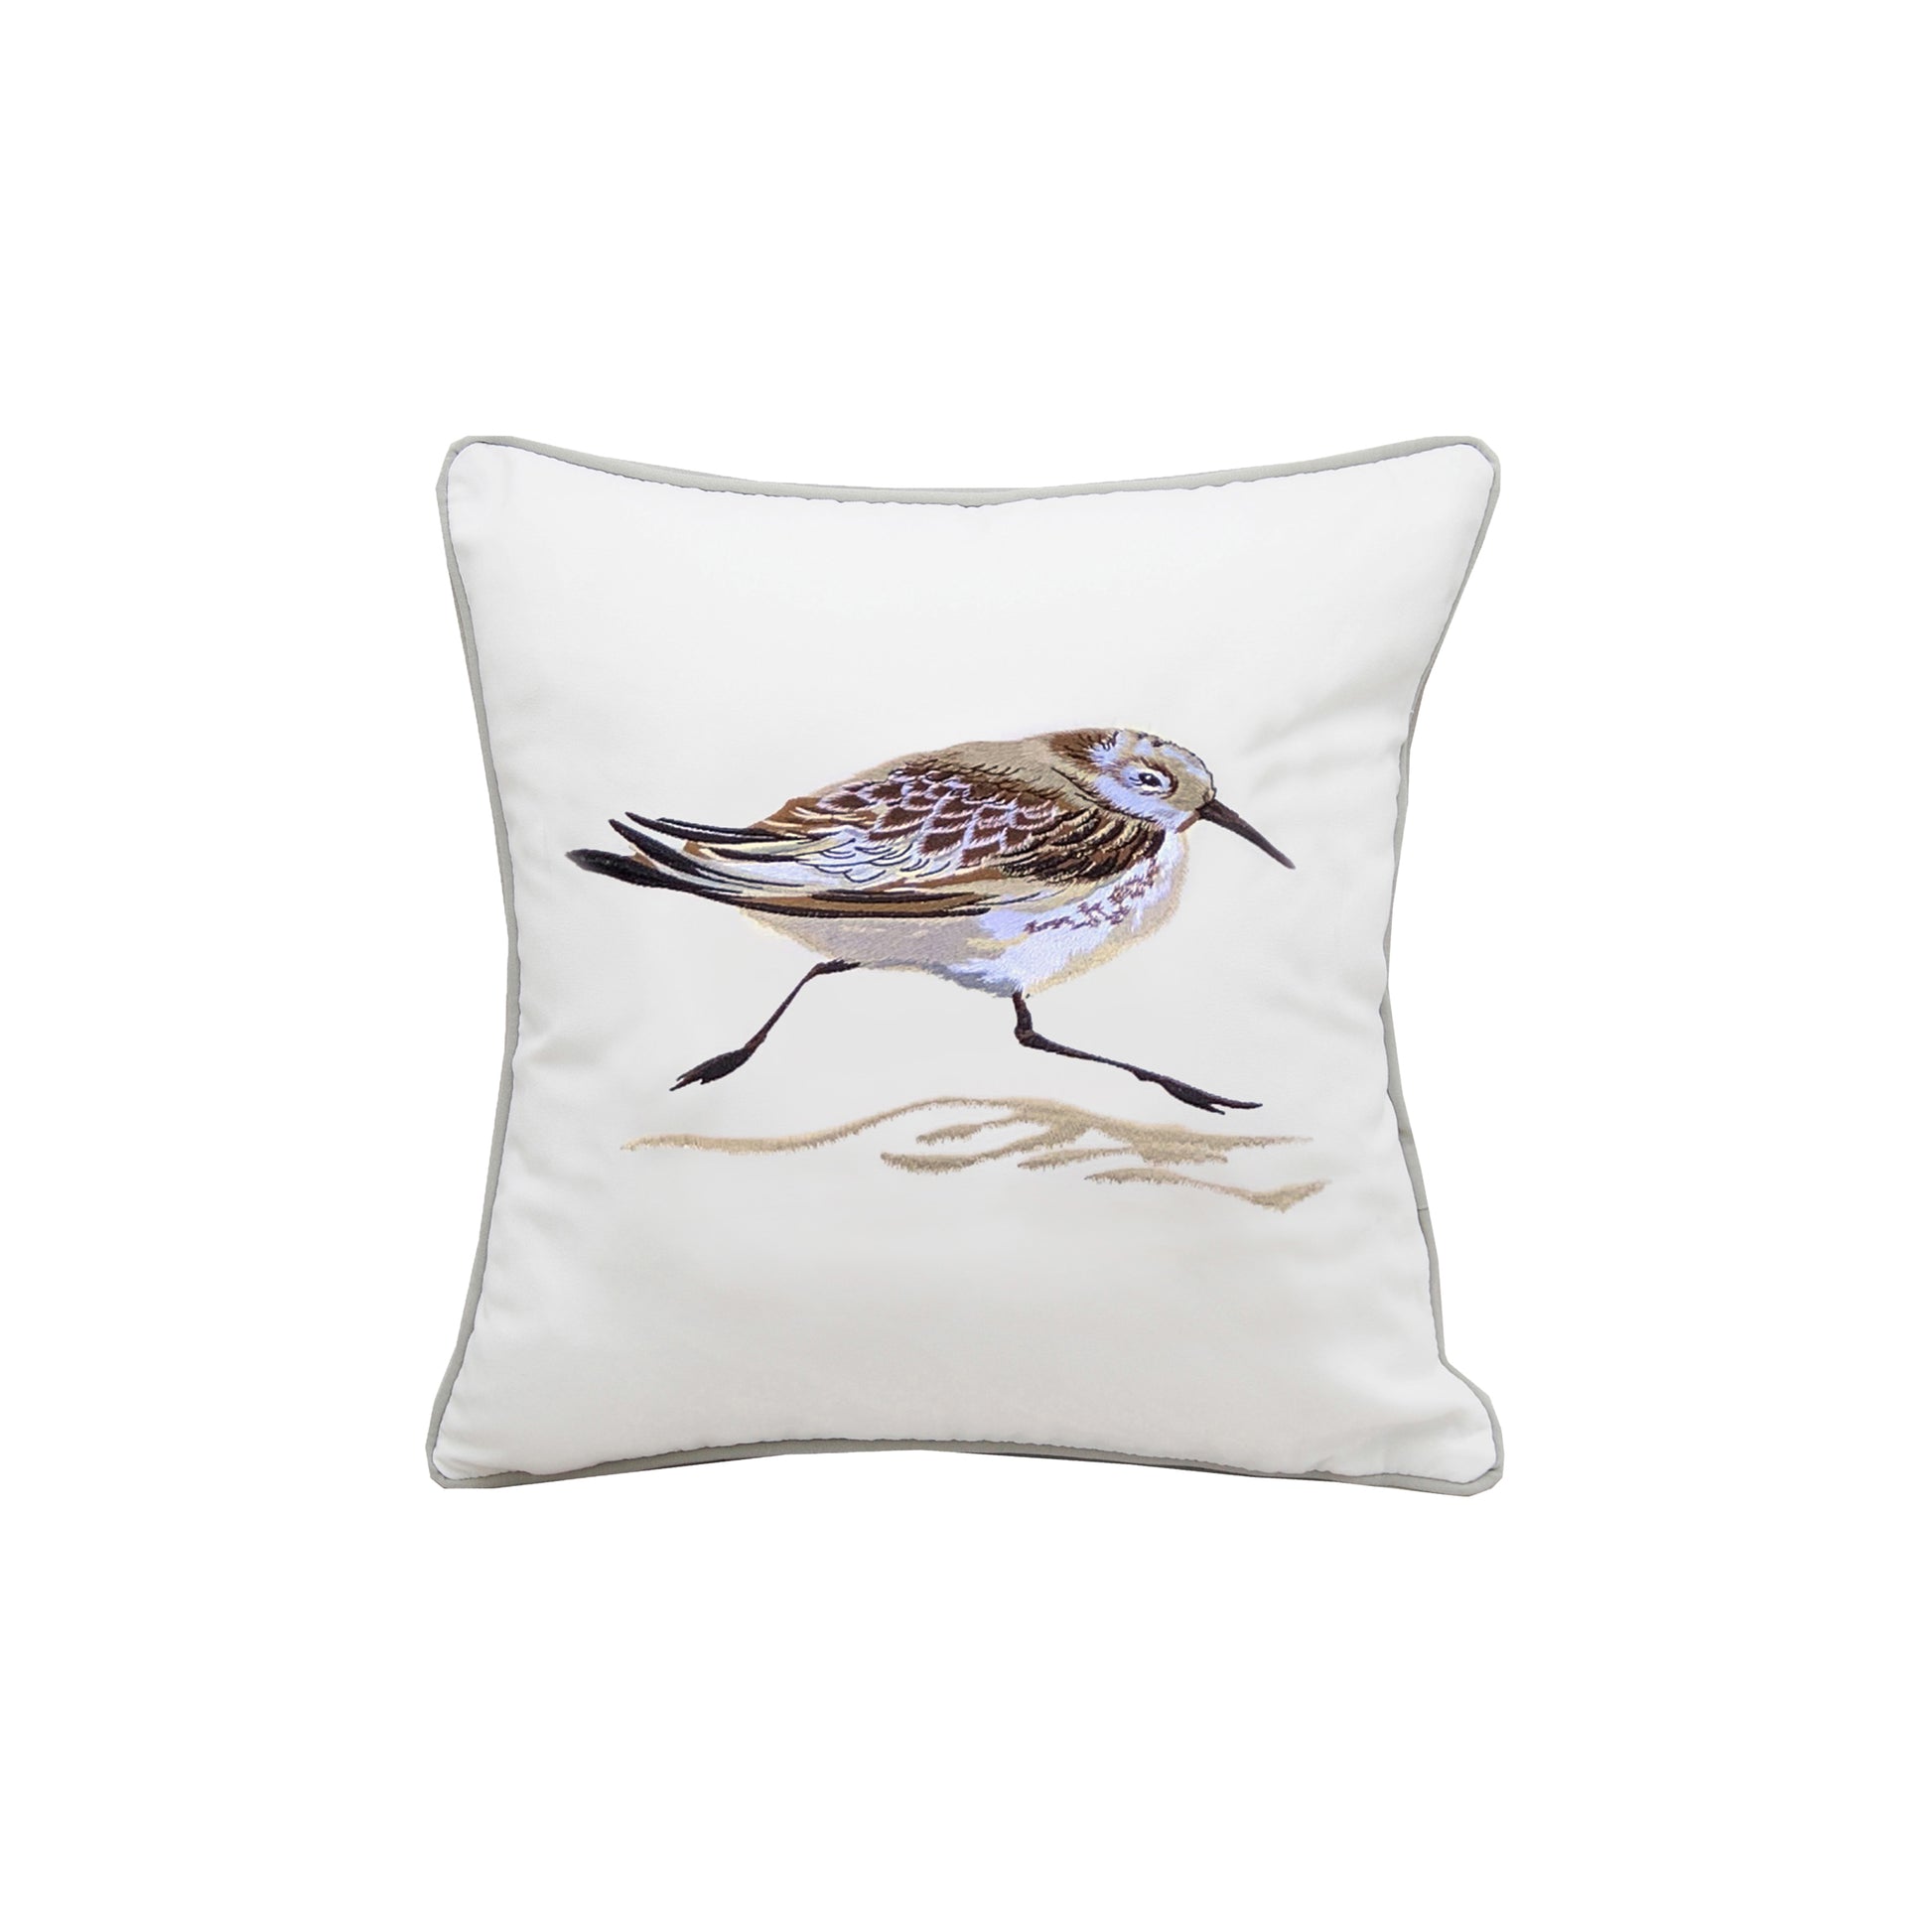 A sandpiper running across the sand embroidered on a white background. Pillow finished with grey piped edging.